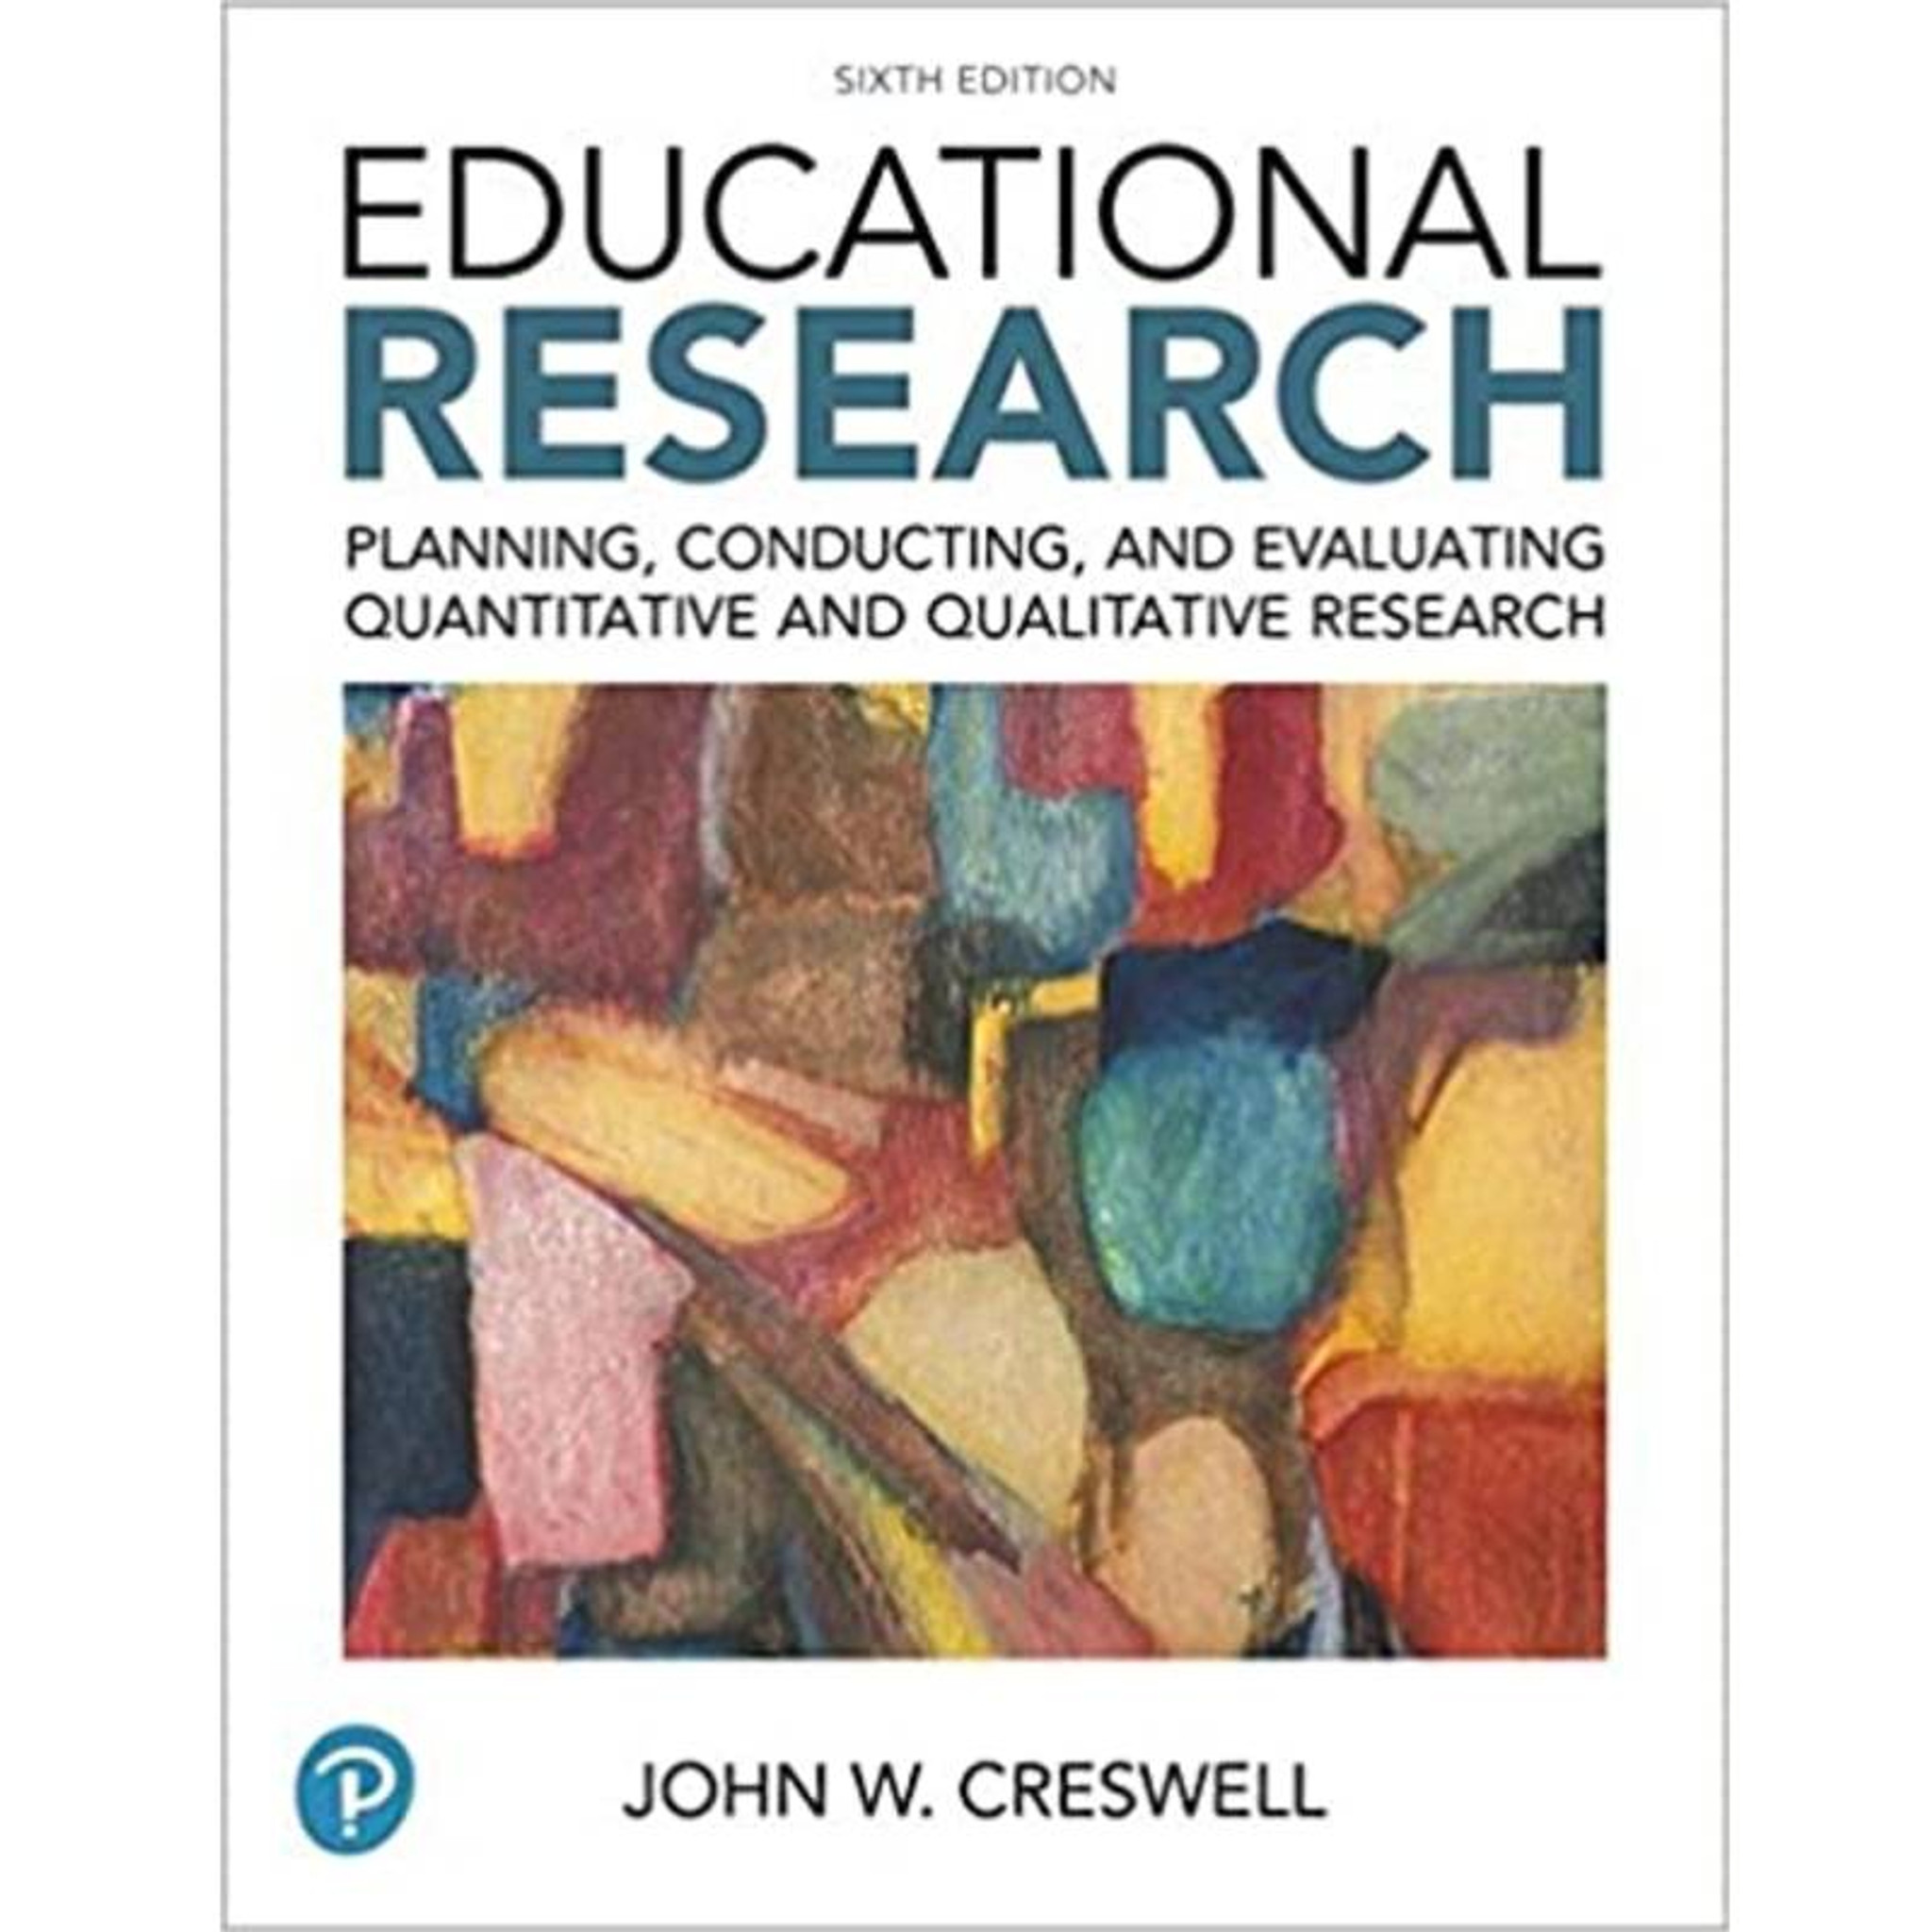 when evaluating a research report educators should